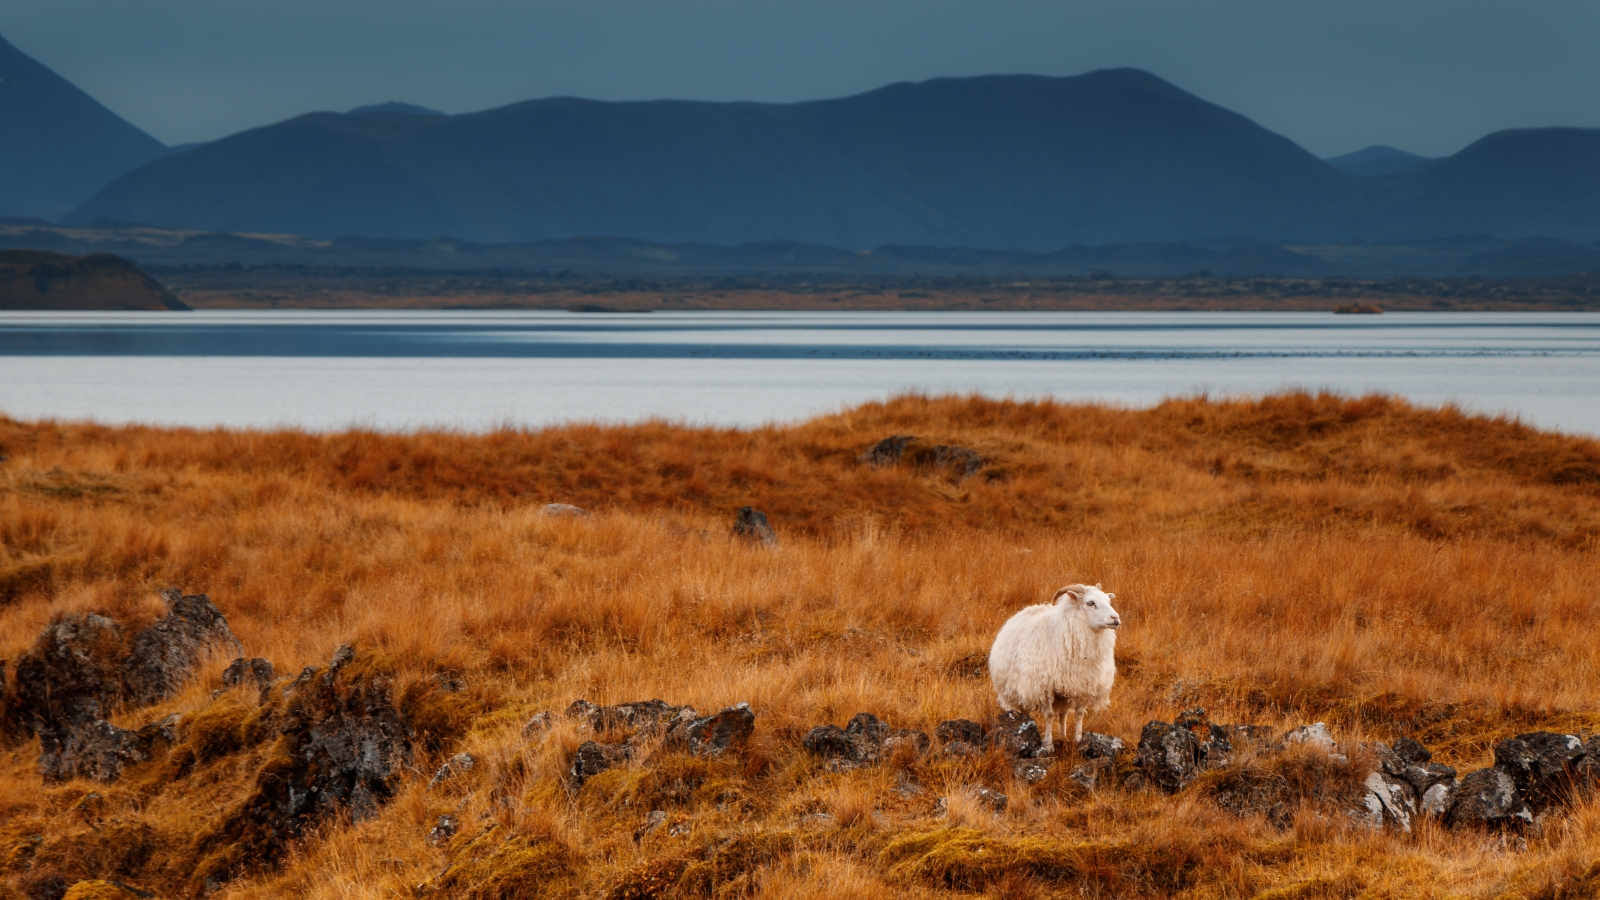 Lone sheep in Iceland